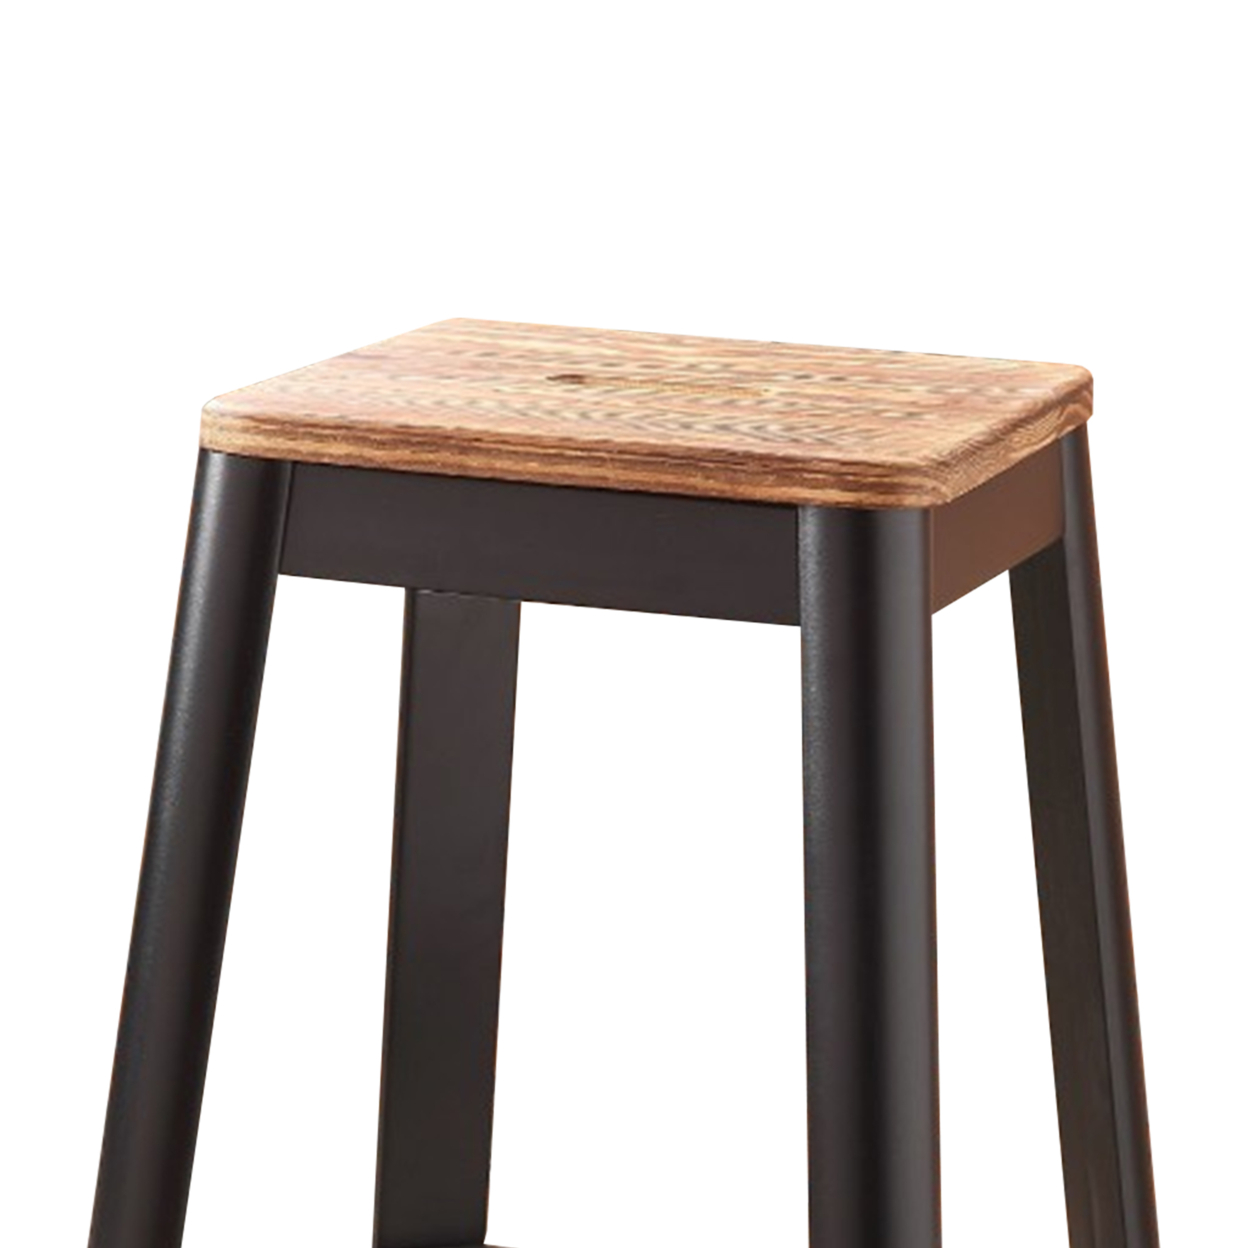 Industrial Style Metal Frame And Wooden Bar Stool, Brown And Black- Saltoro Sherpi